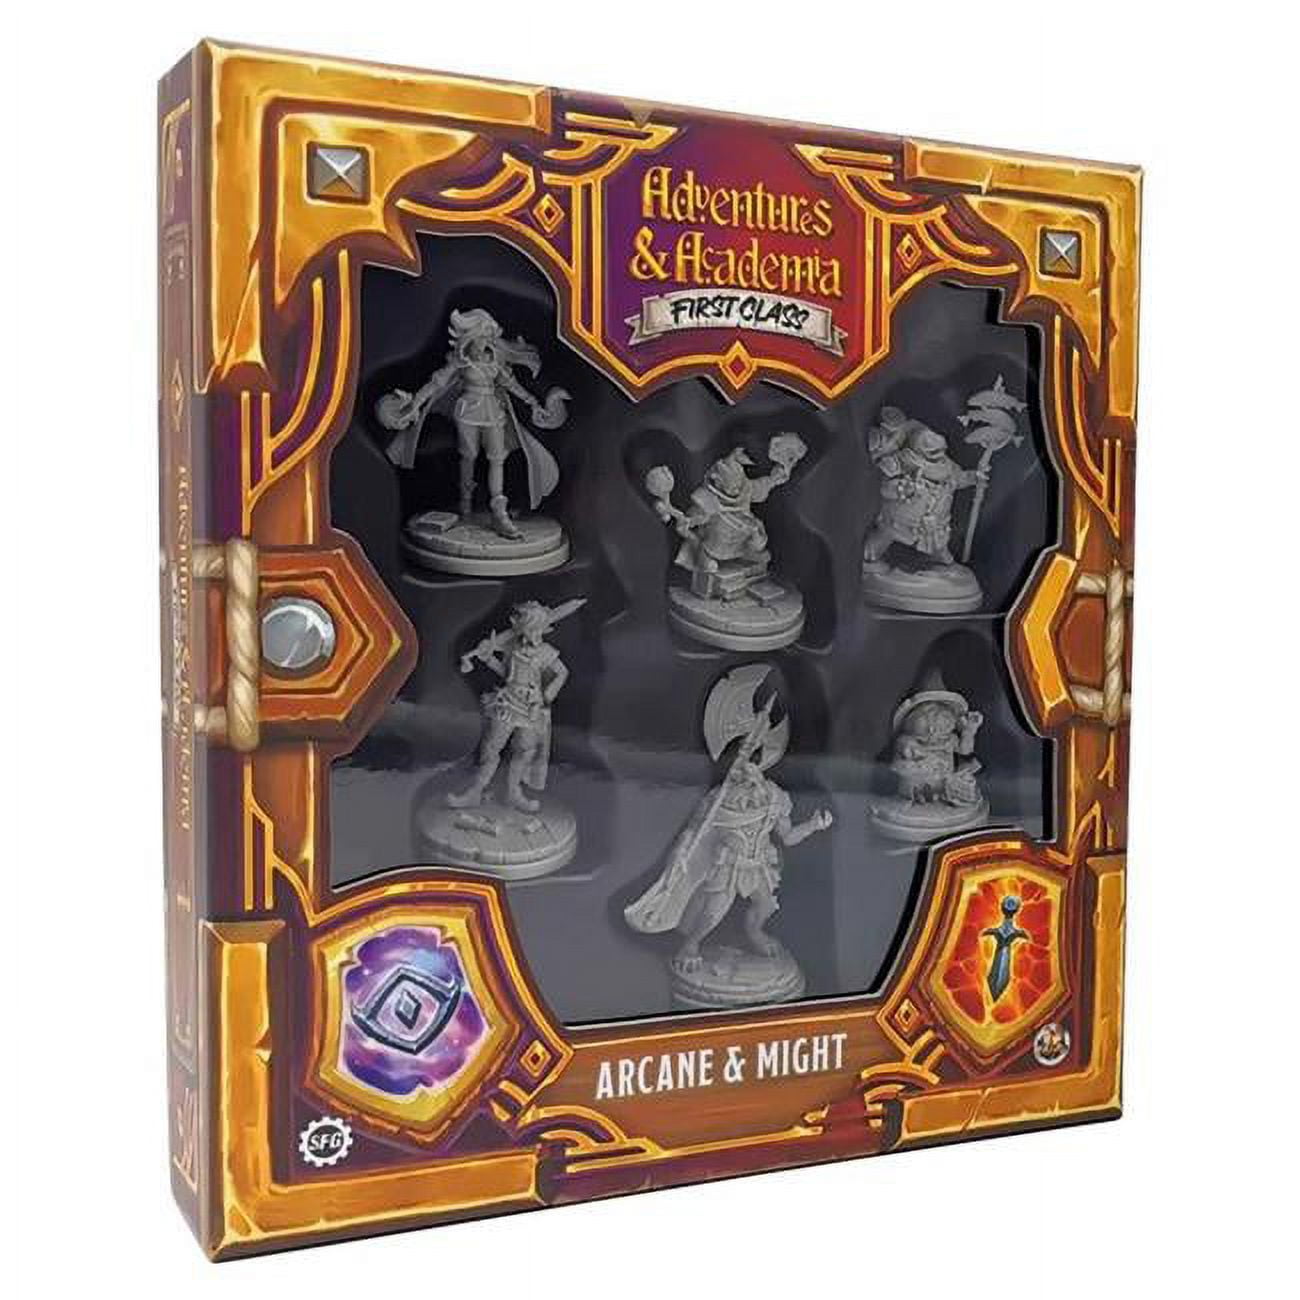 Picture of Steamforged Games STEAA1C-001 Adventures & Academia First Class Arcane & Might Miniatures